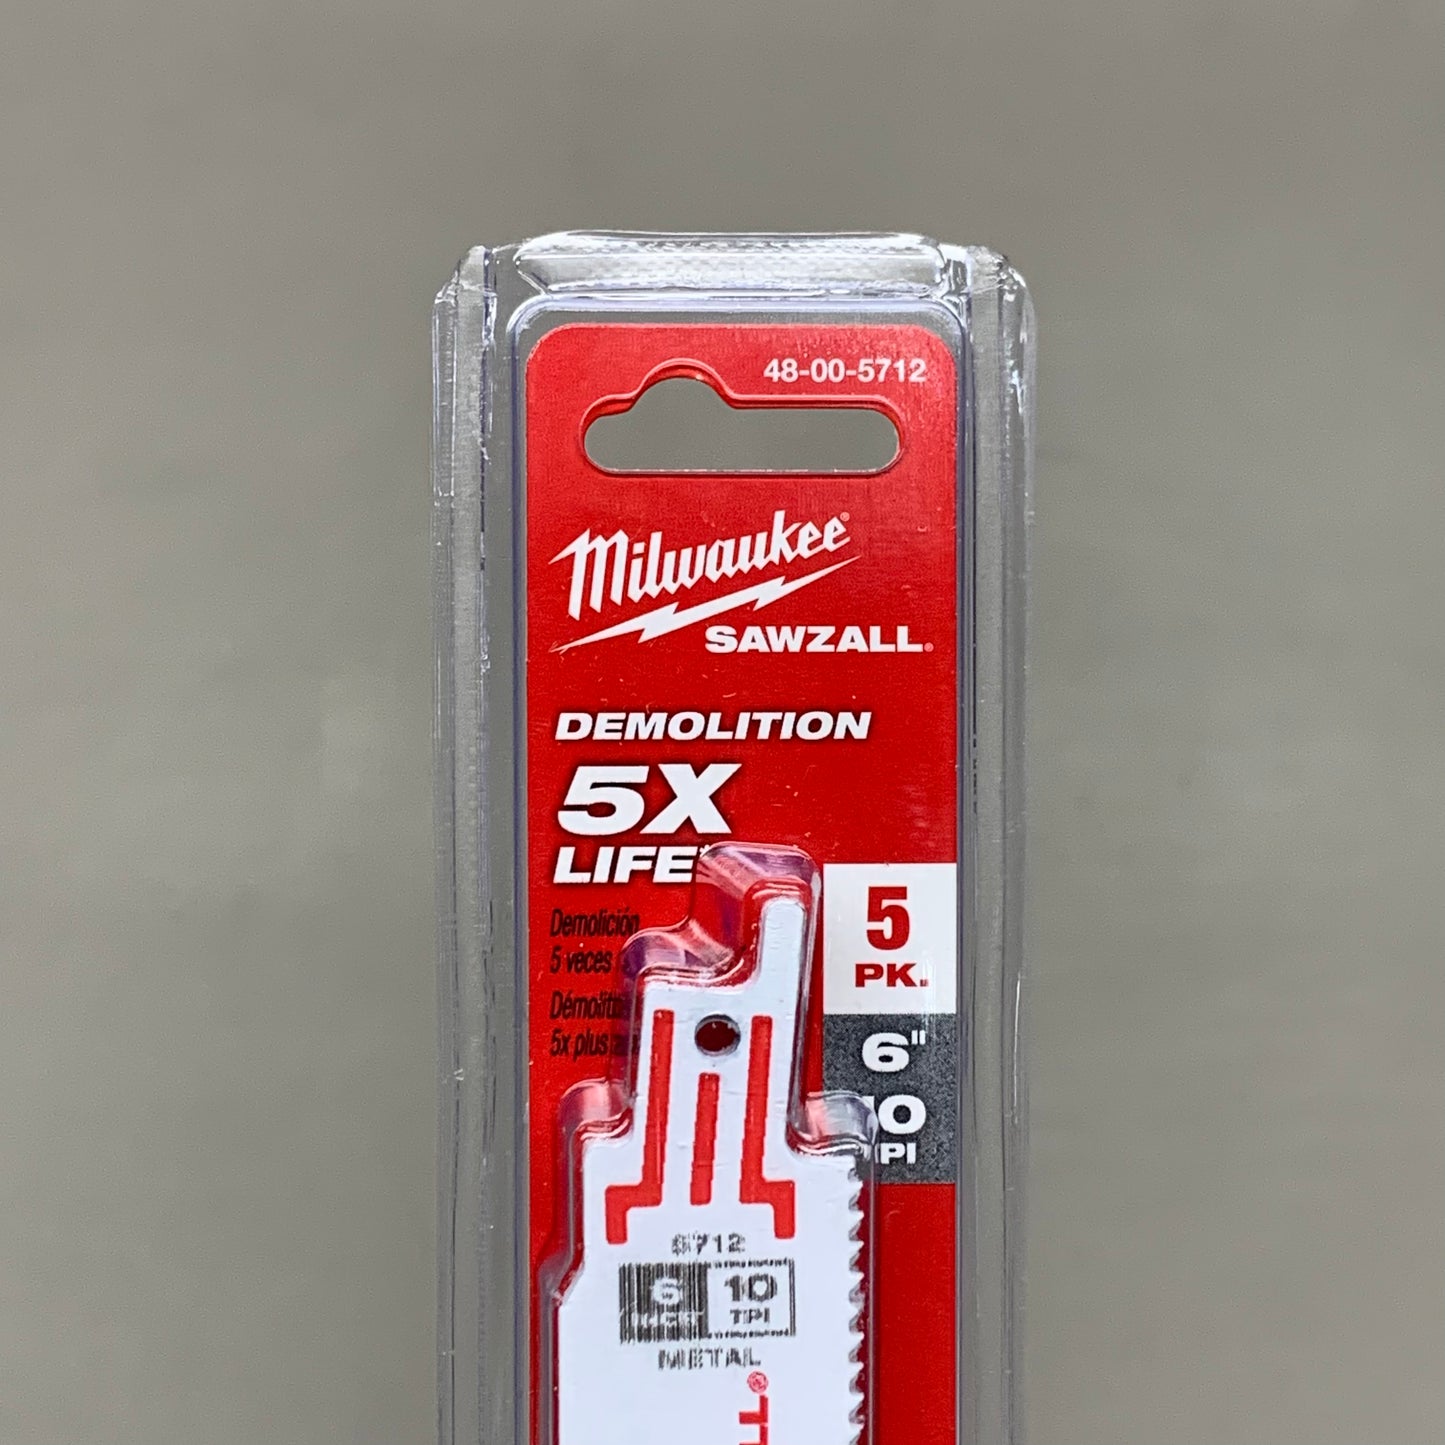 MILWAUKEE 5-PACK SAWZALL Reciprocating Metal Saw Blades 6" 10 TPI TORCH 48-00-5712 (New)